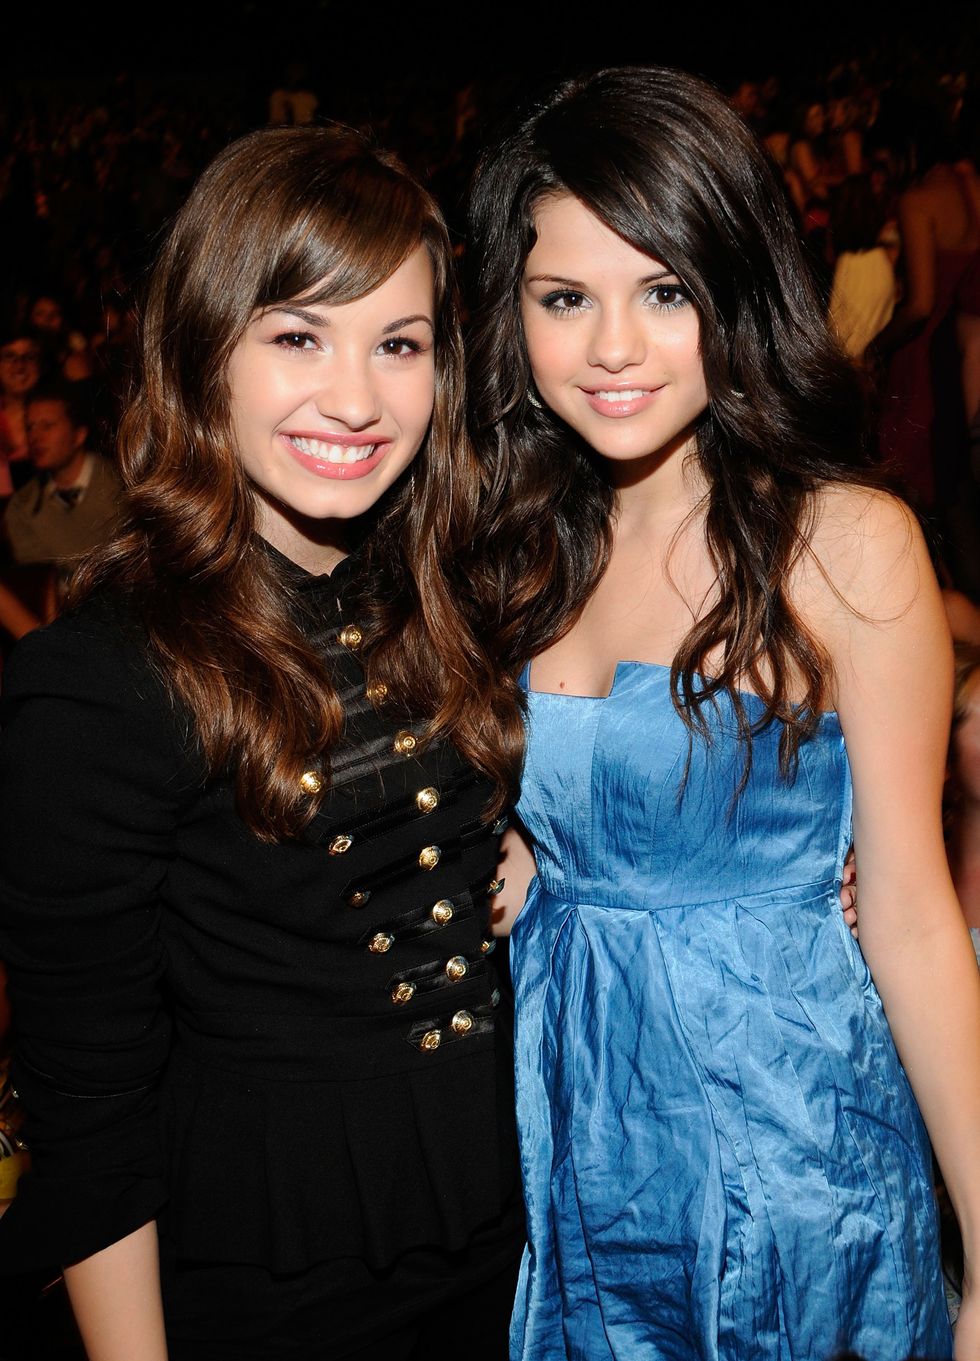 exclusive, premium rates apply los angeles, ca   august 03 singer demi lovato and actress selena gomez during the 2008 teen choice awards at gibson amphitheater on august 3, 2008 in los angeles, california  photo by k mazurtca 2008wireimage